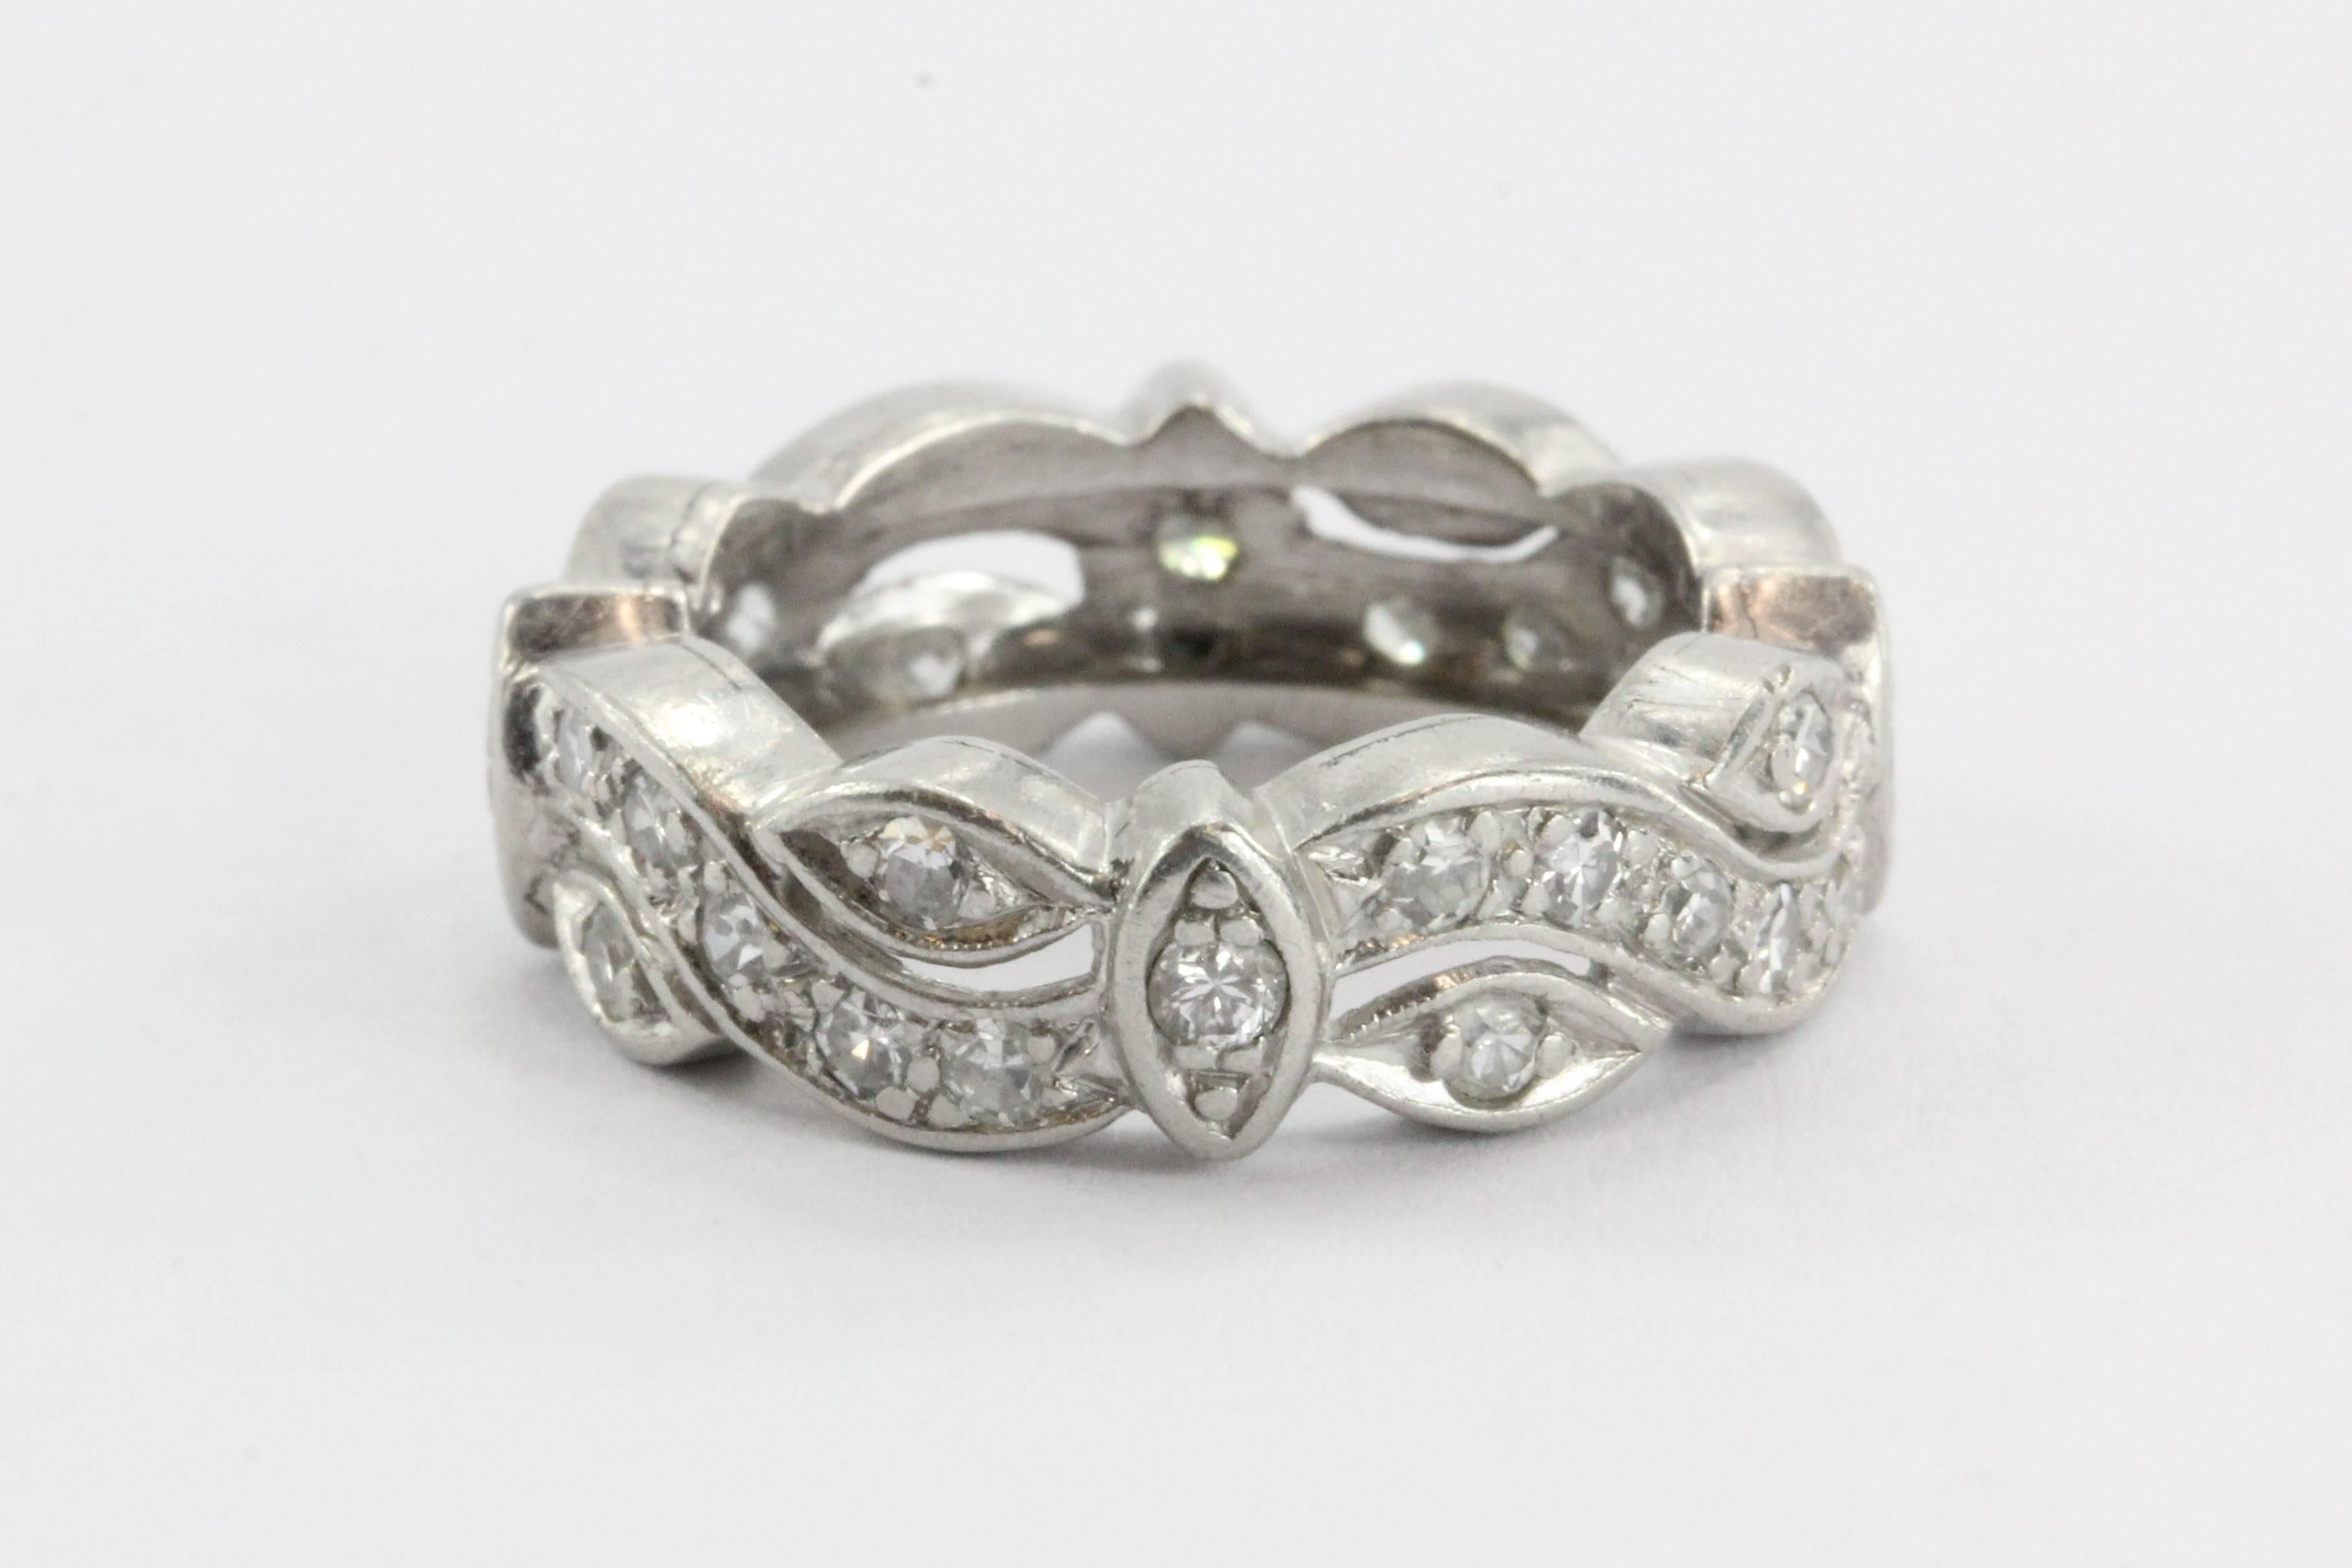 Antique Art Deco Diamond Wedding Band Vintage Eternity Cigar Band

The ring is made of platinum and set with 1.2 CTW of single cut F color, Vs2 clarity diamonds. There are 24 .05 carat diamonds wrapped completely around the band. The ring is in